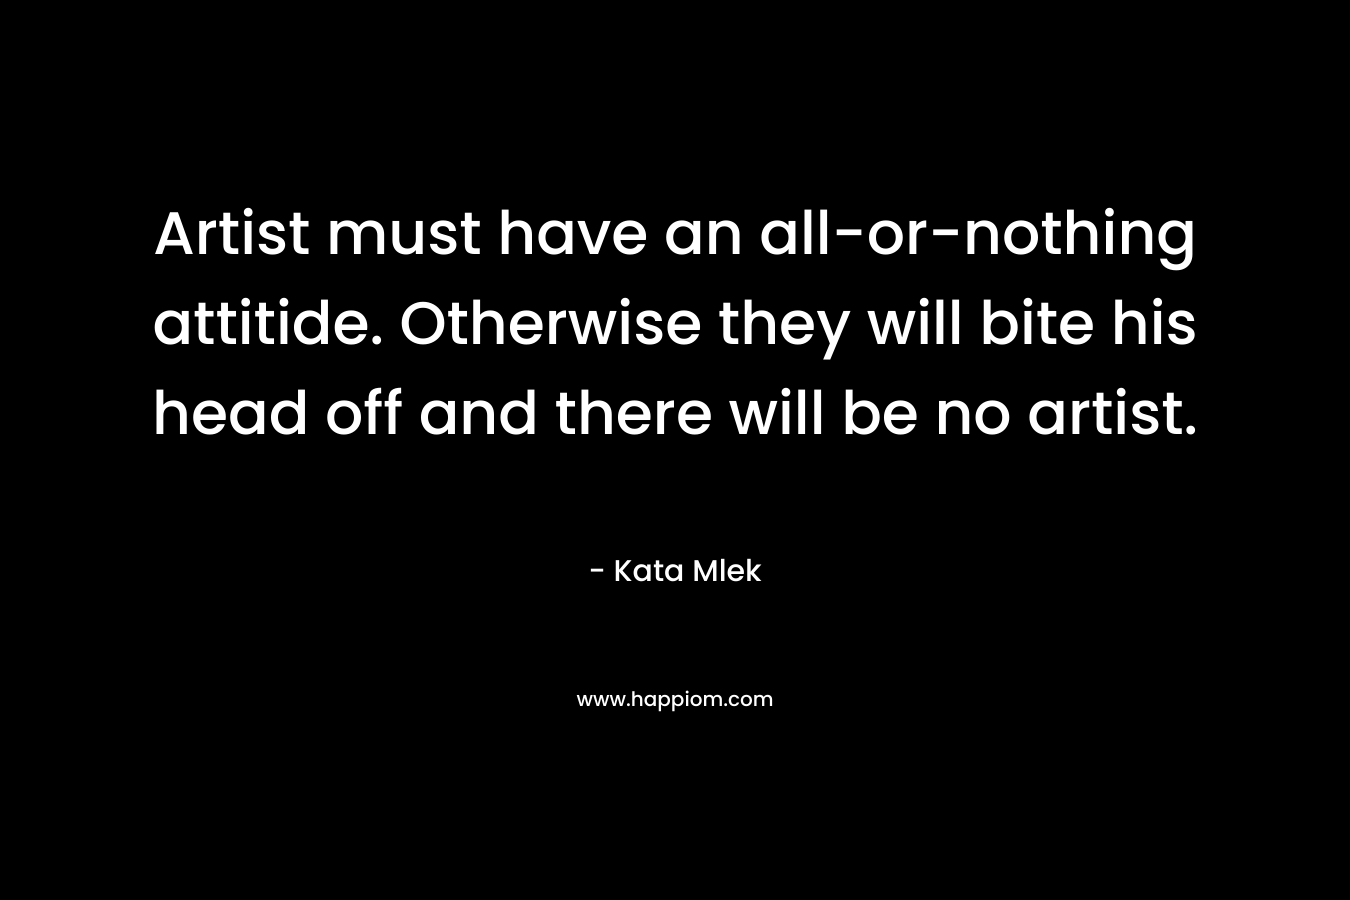 Artist must have an all-or-nothing attitide. Otherwise they will bite his head off and there will be no artist.